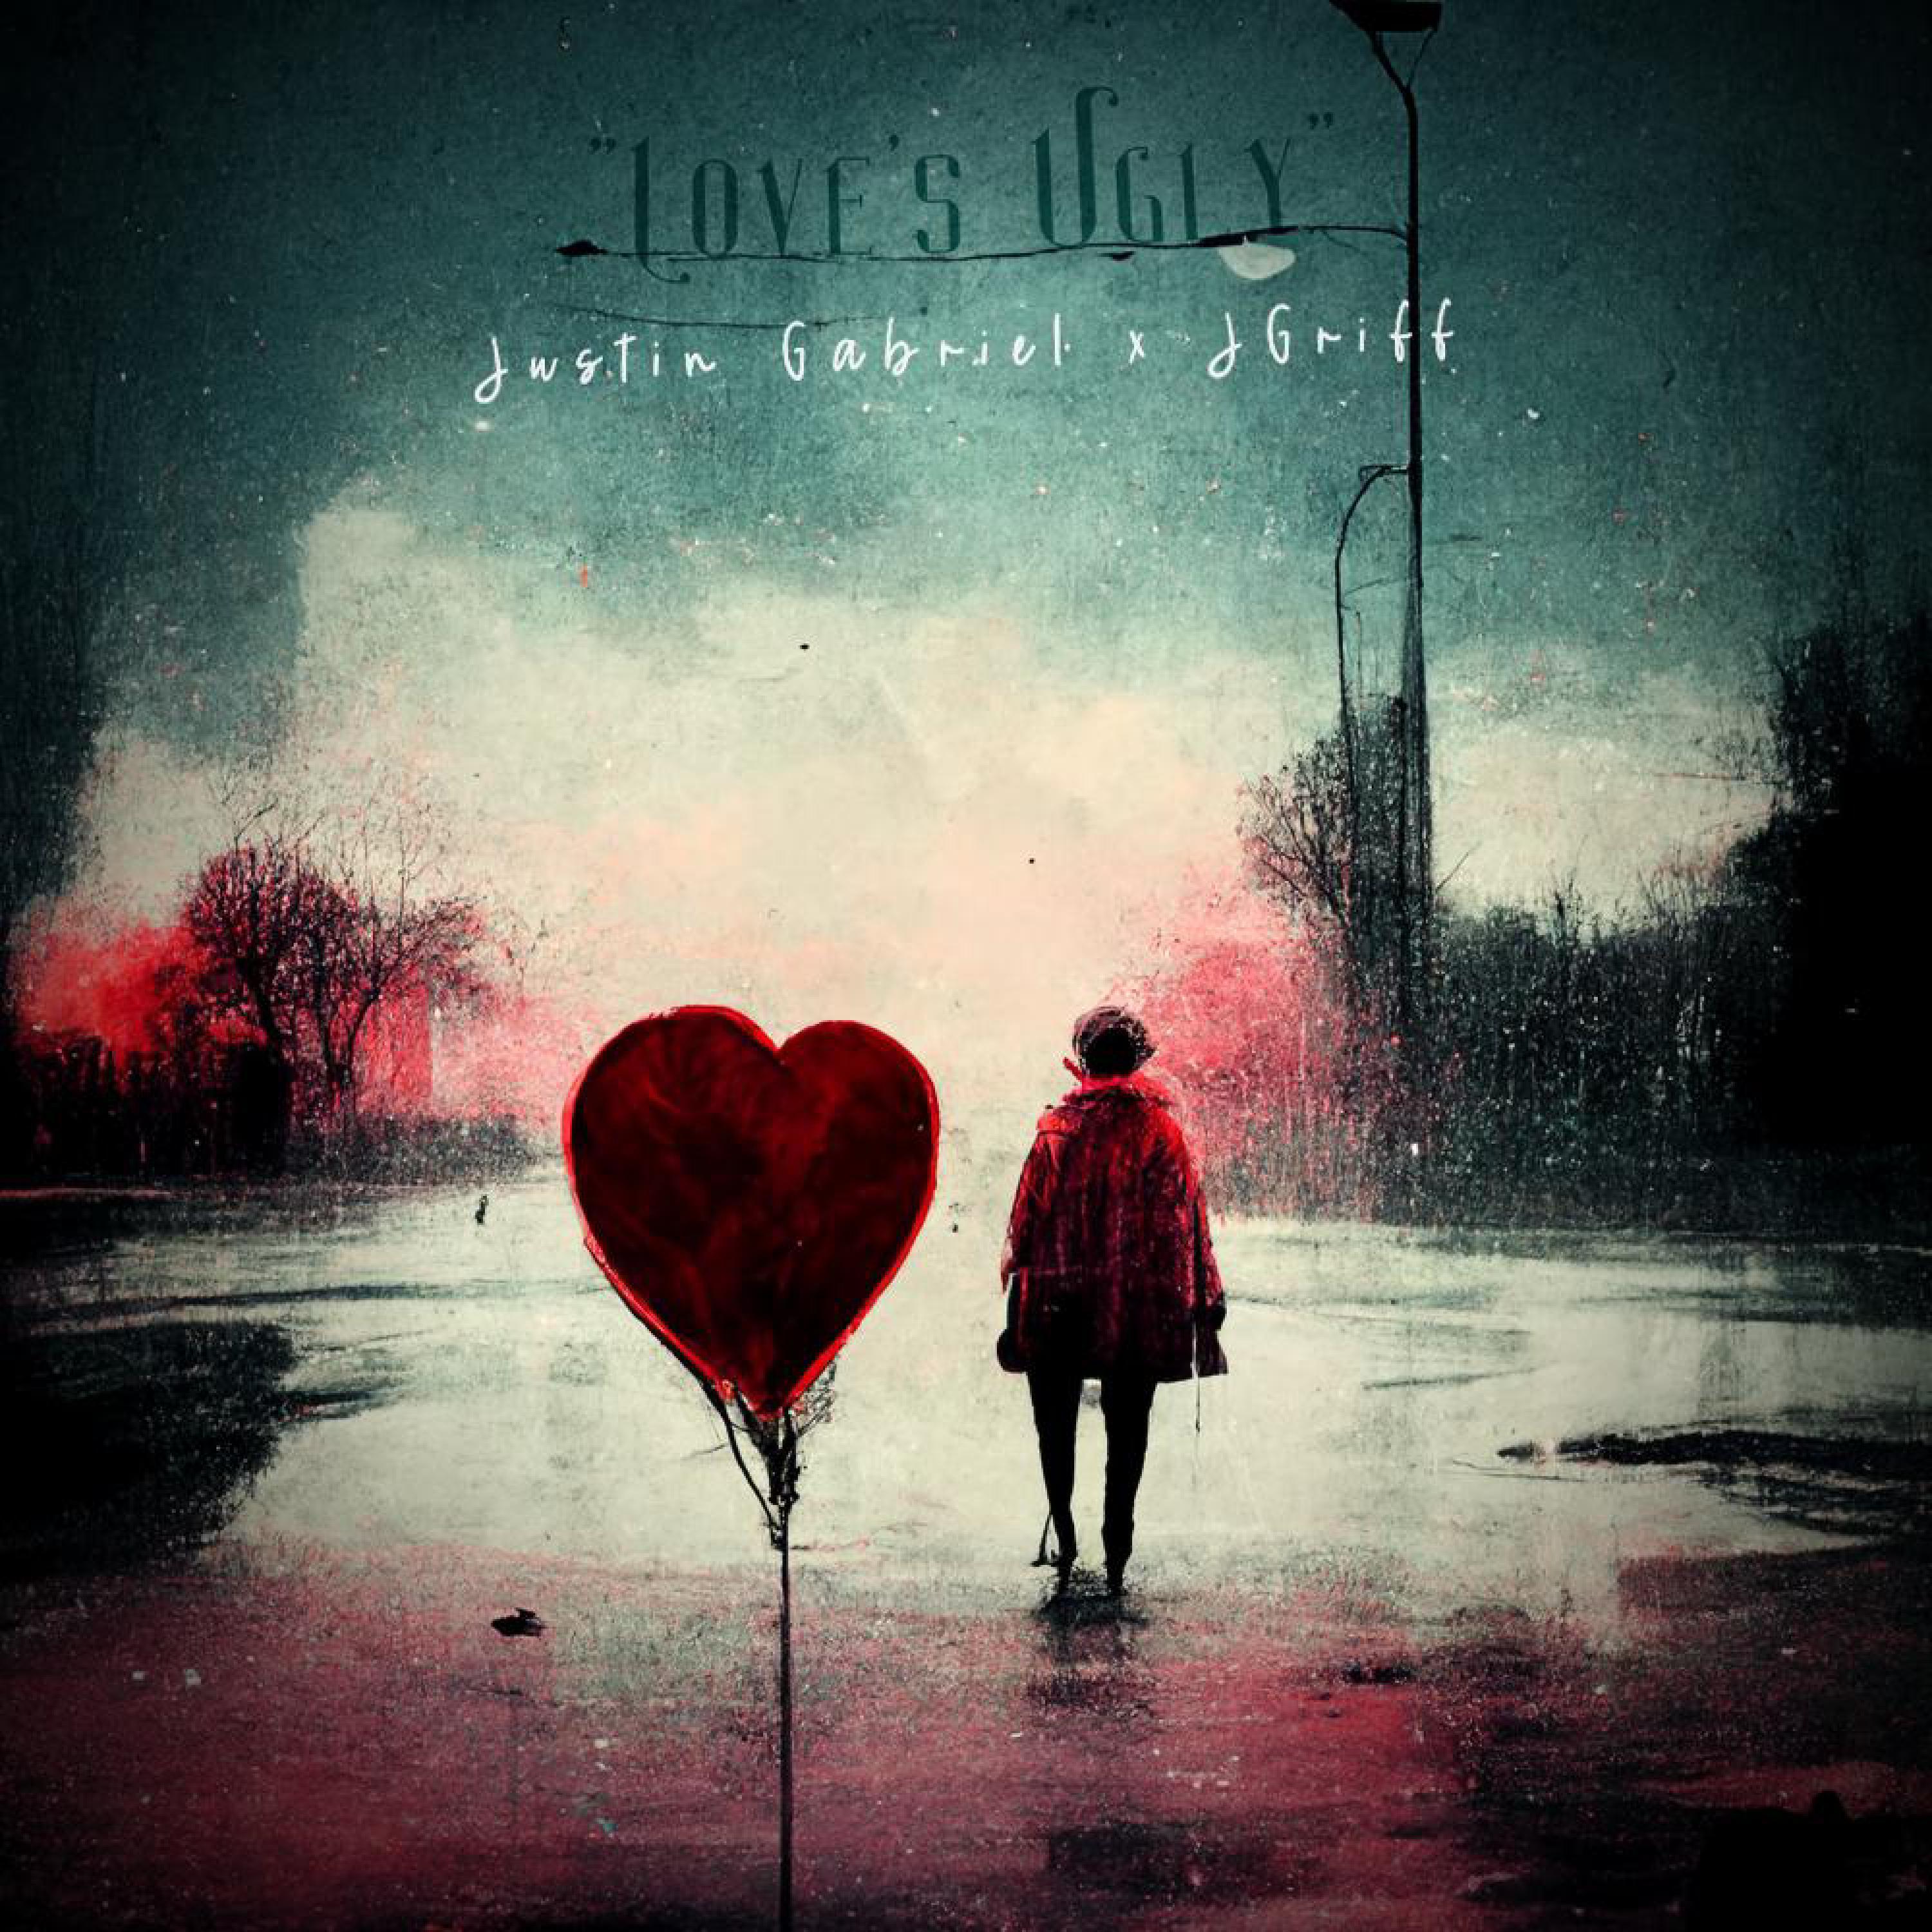 Justin Gabriel - Love's Ugly (feat. Jgriff)